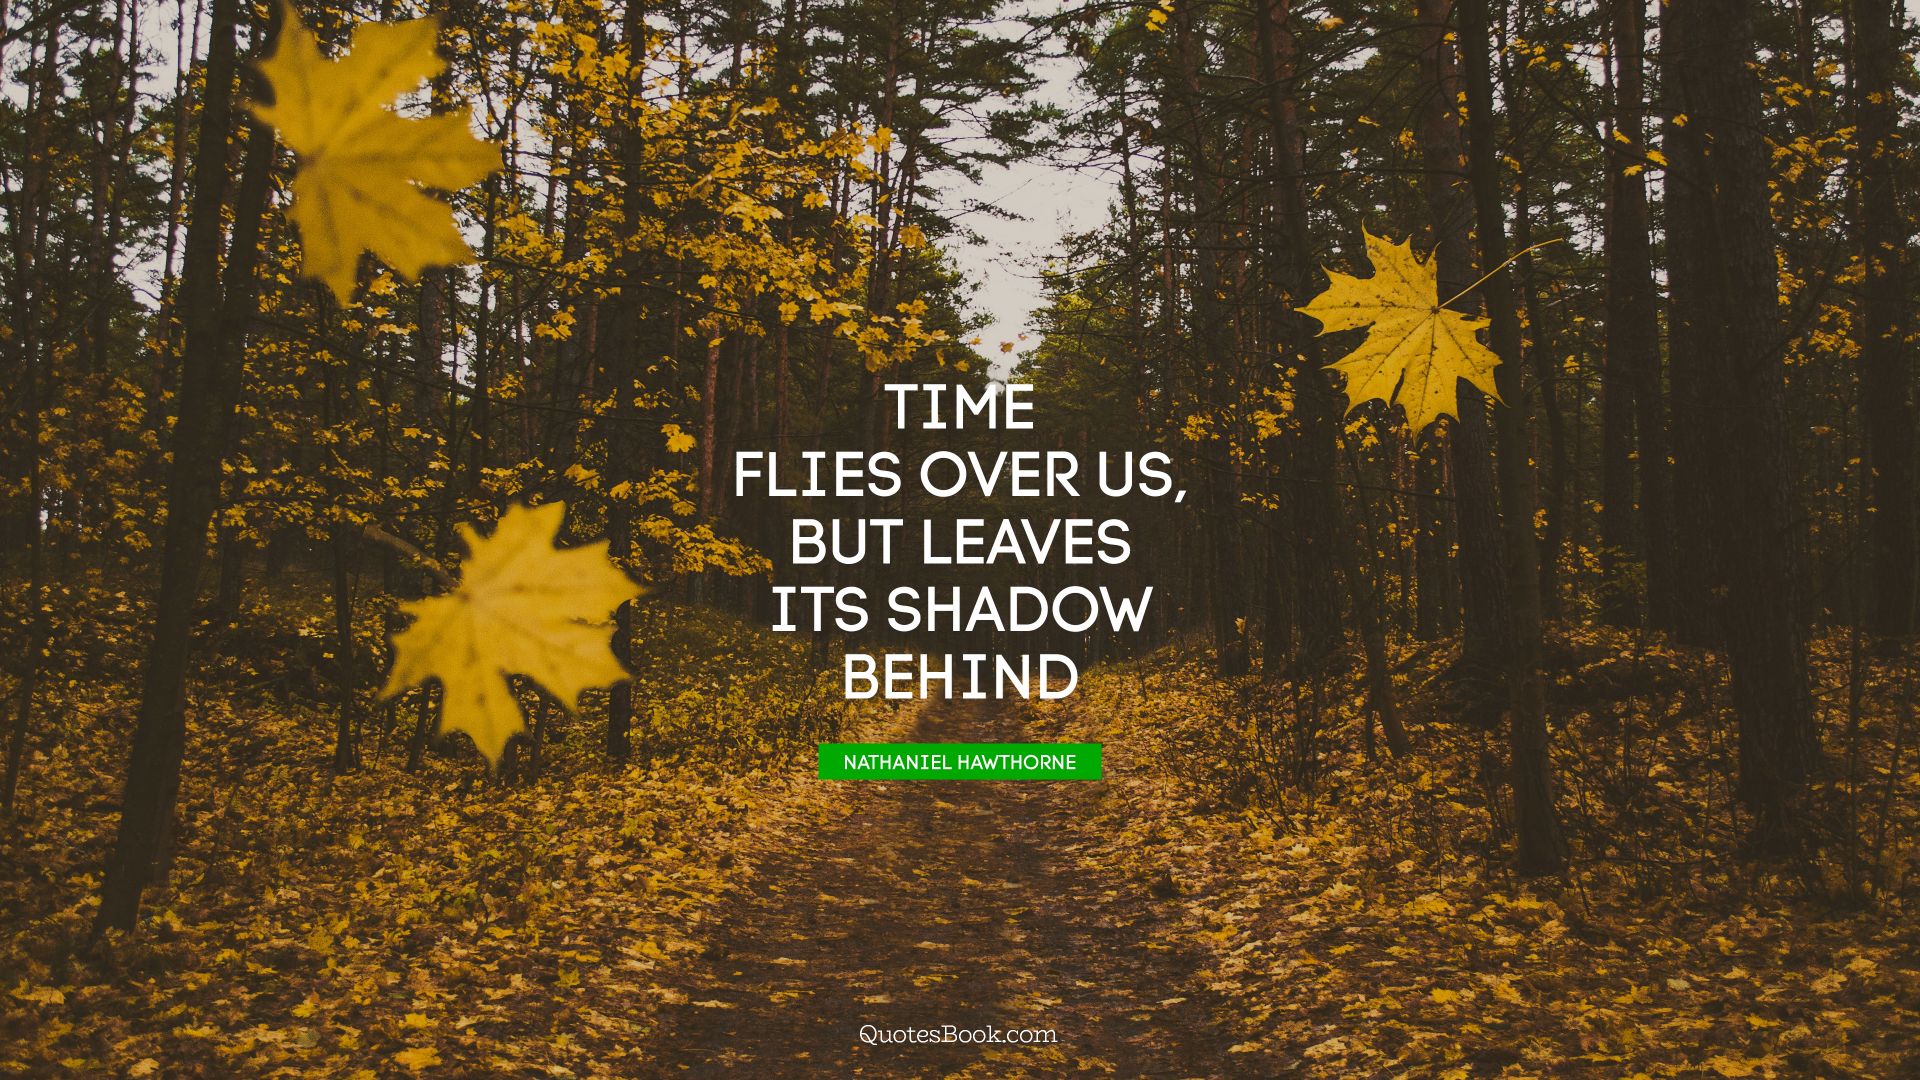 Time flies over us, but leaves its shadow behind. - Quote by Nathaniel Hawthorne